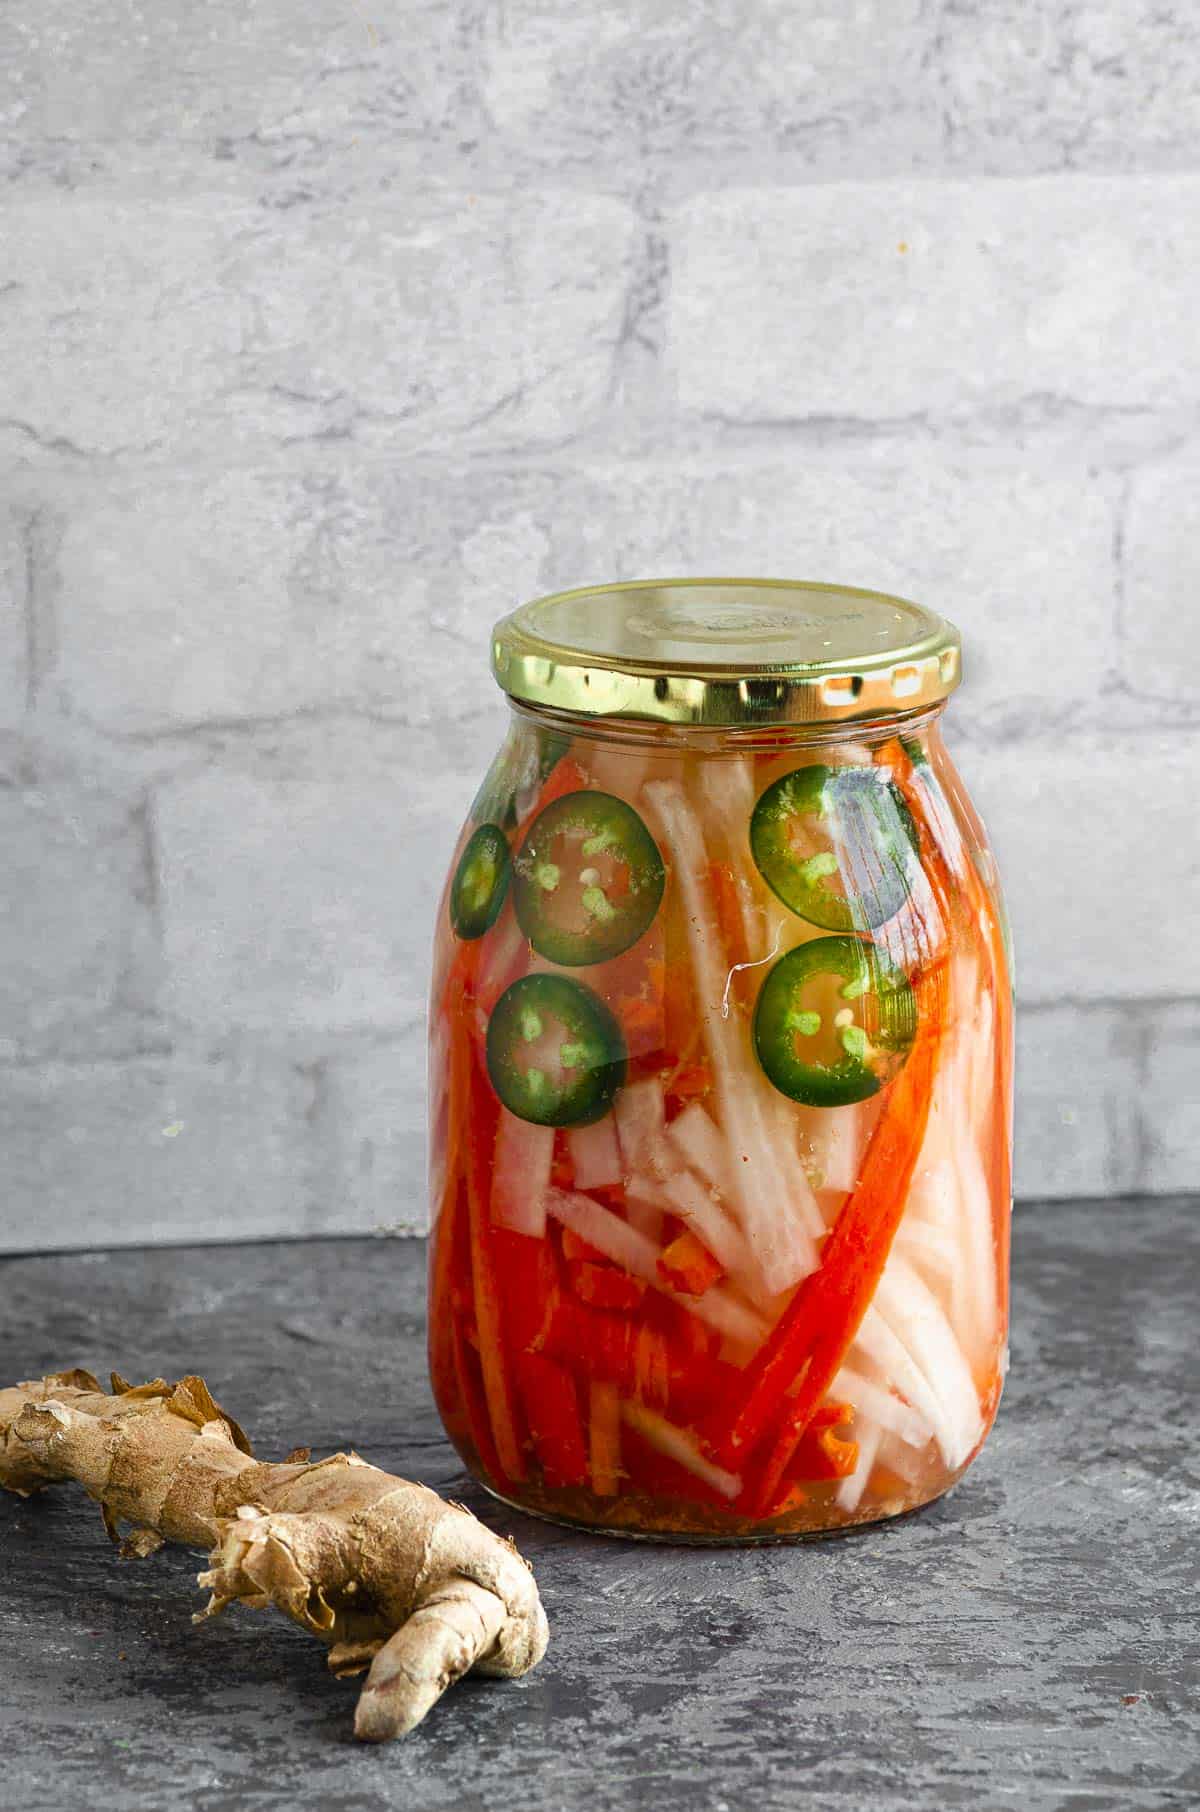 A jar of pickled daikon, carrots and jalapeno with ginger sitting next to it